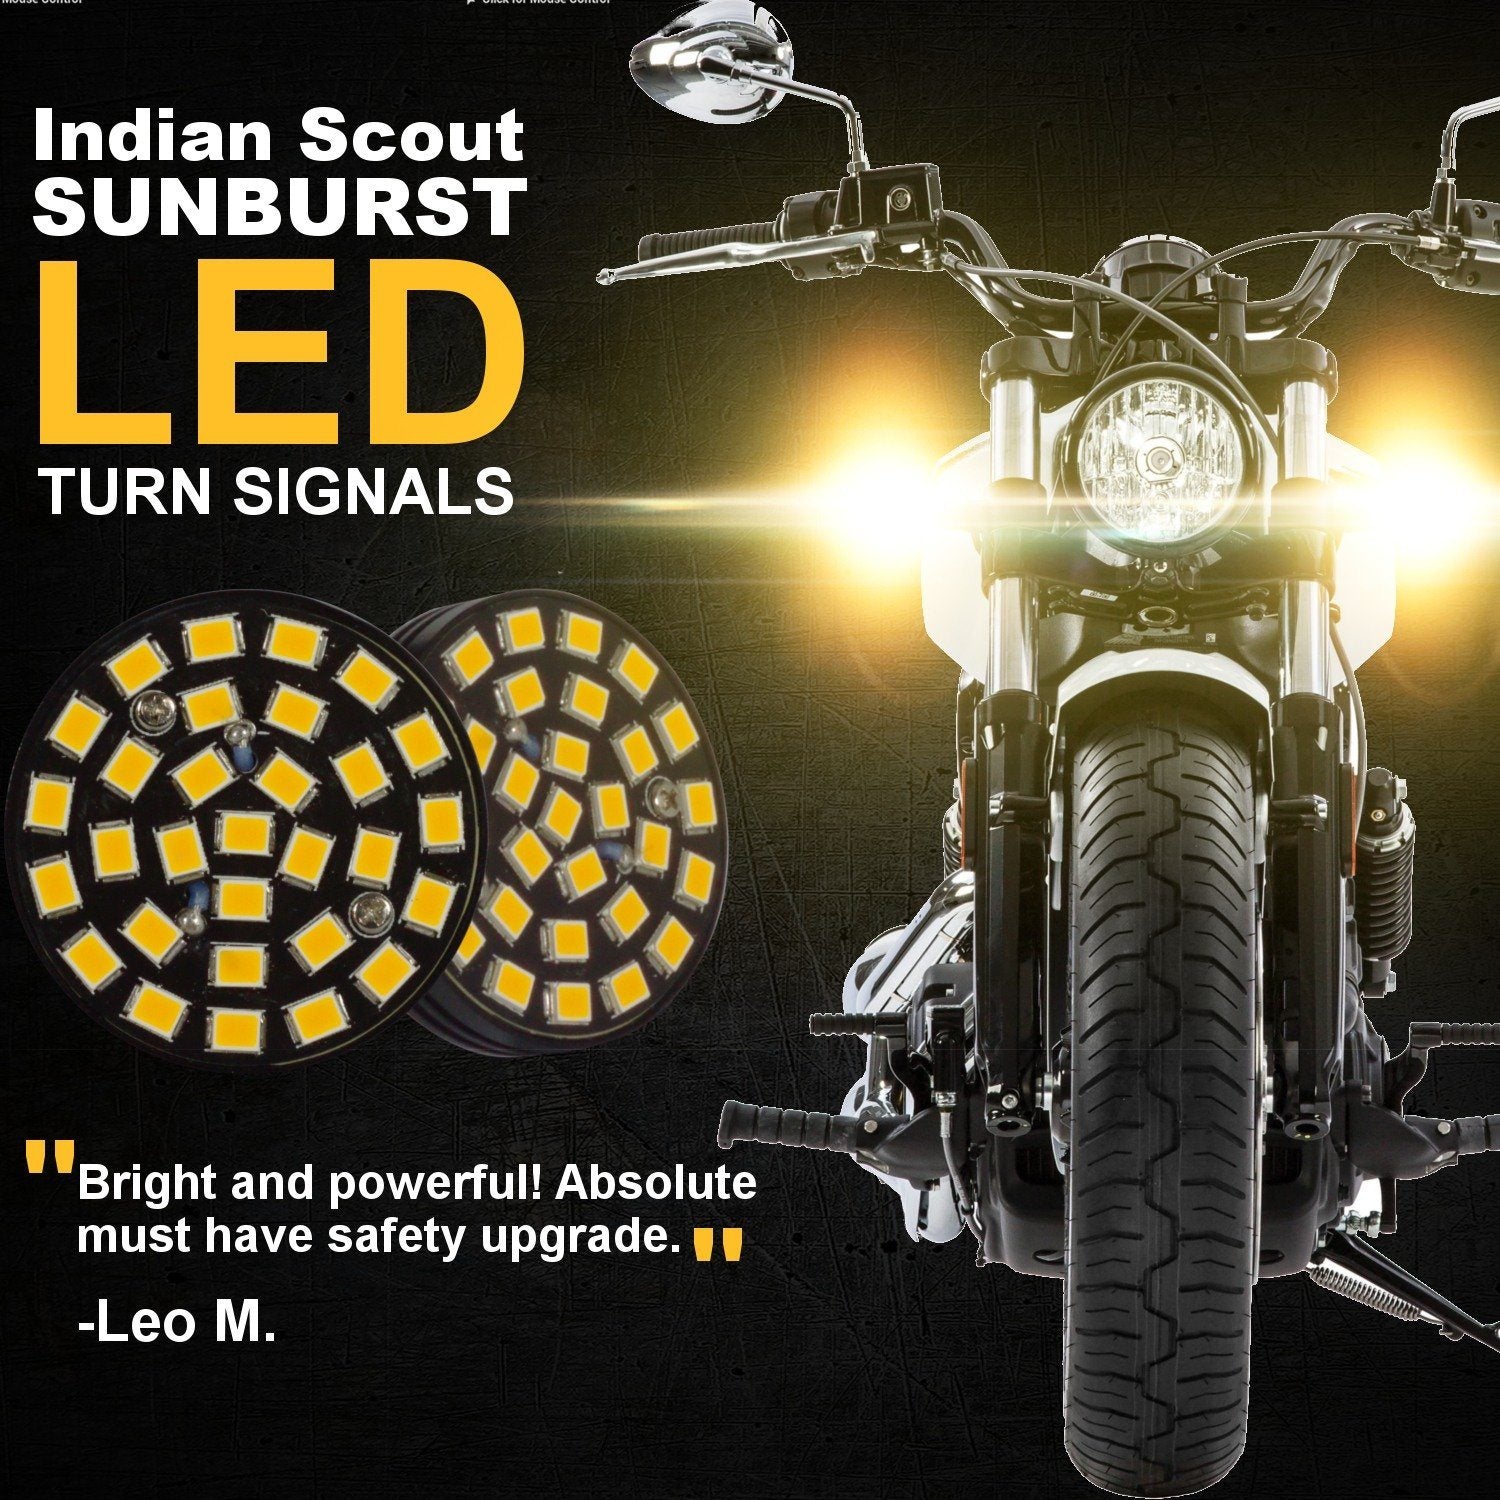 Specialty LED Turn Signals - Indian Scout SUNBURST LED Turn Signals